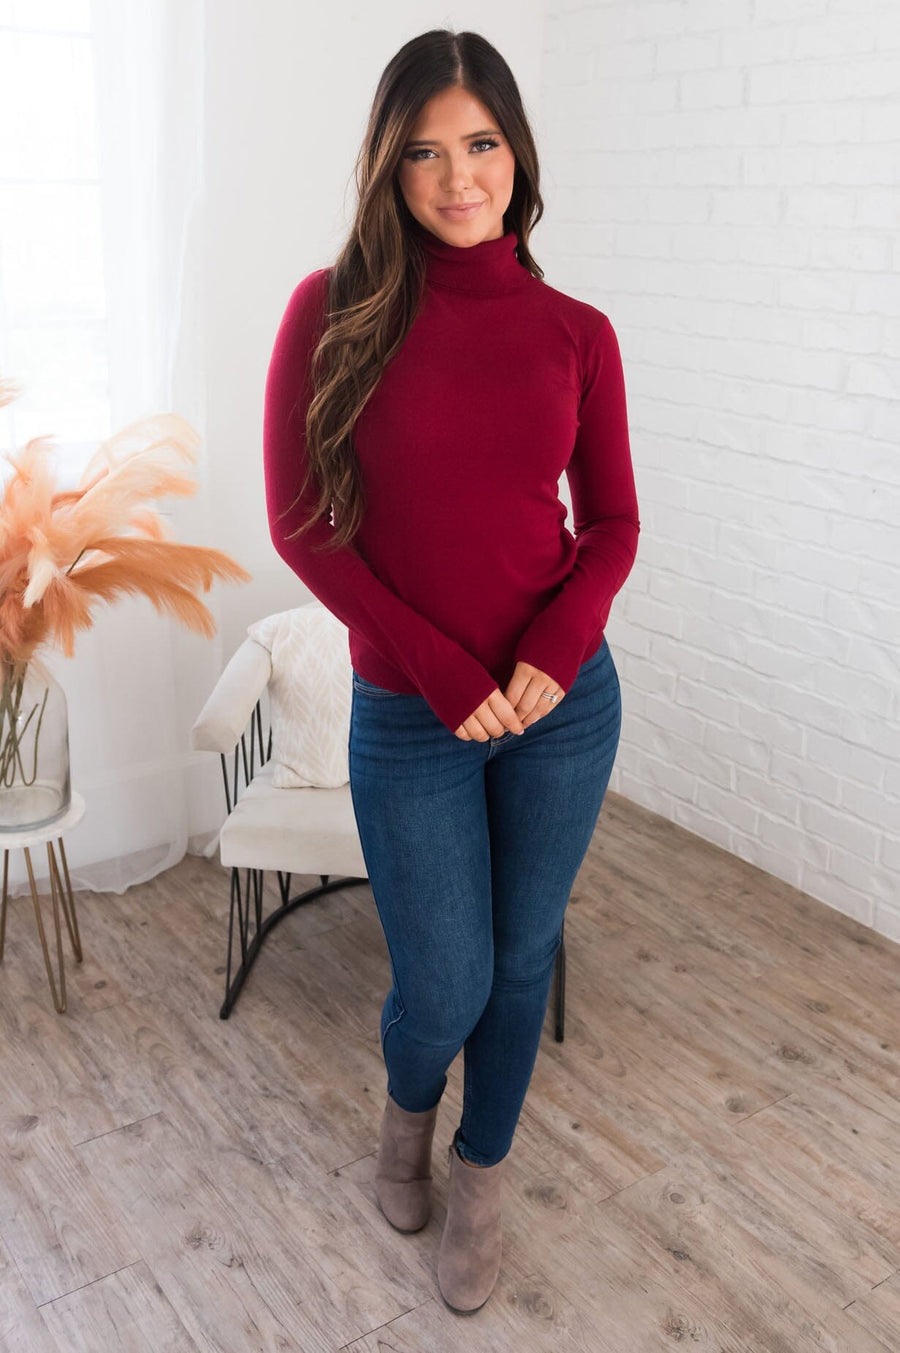 Simply Stunning Modest Turtleneck Sweater NeeSee's Dresses 